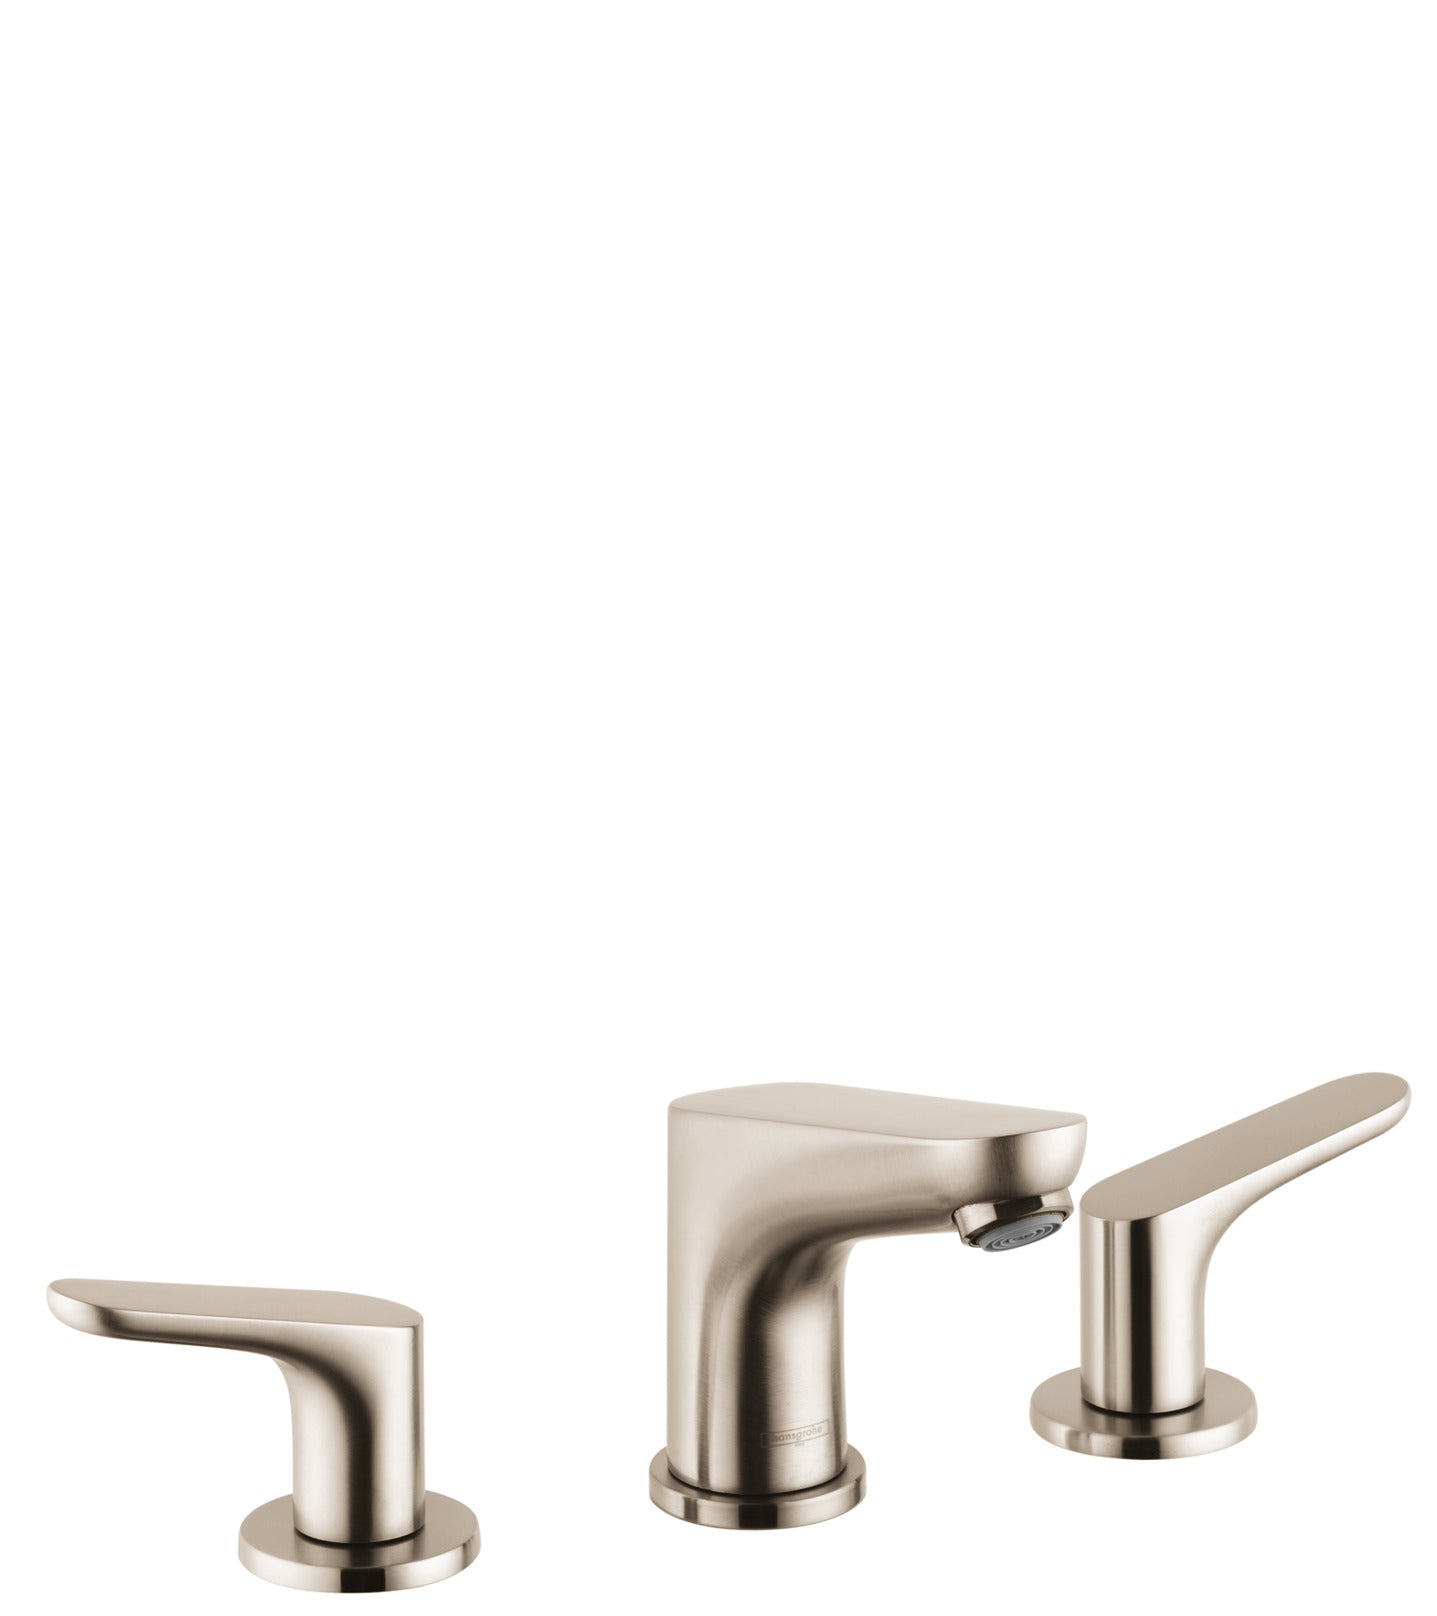 HANSGROHE 04369820 Brushed Nickel Focus Modern Widespread Bathroom Faucet 1.2 GPM